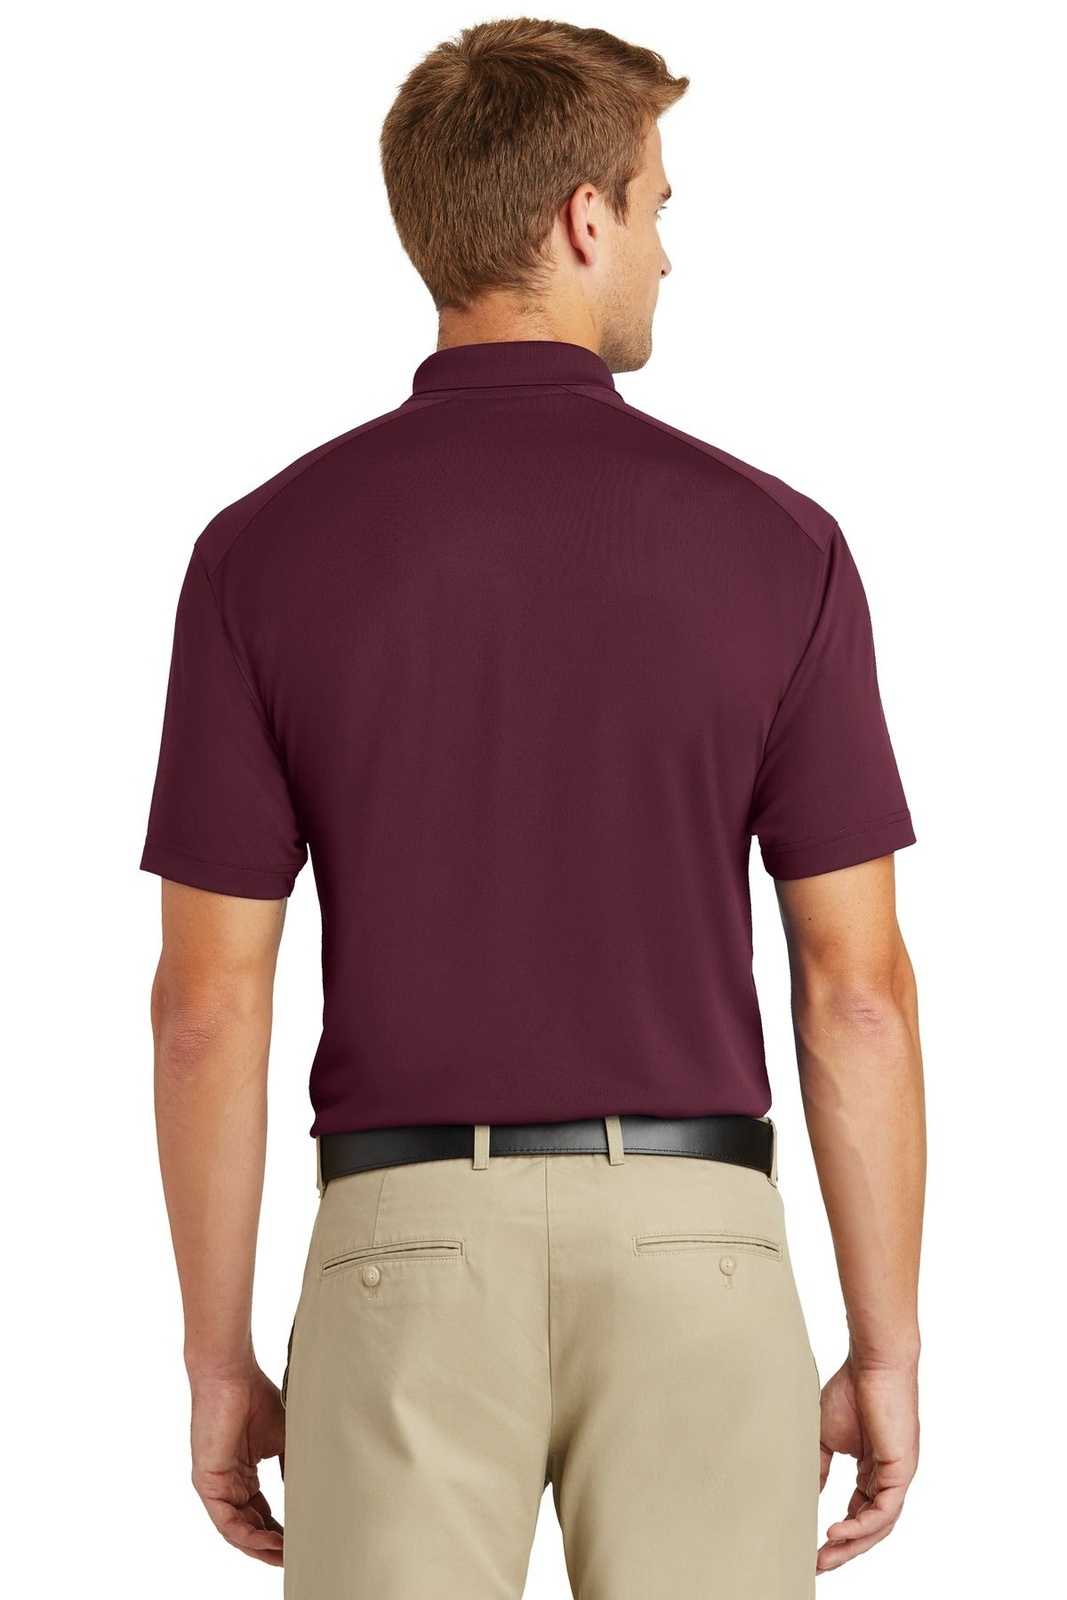 CornerStone CS418 Select Lightweight Snag-Proof Polo - Maroon - HIT a Double - 2